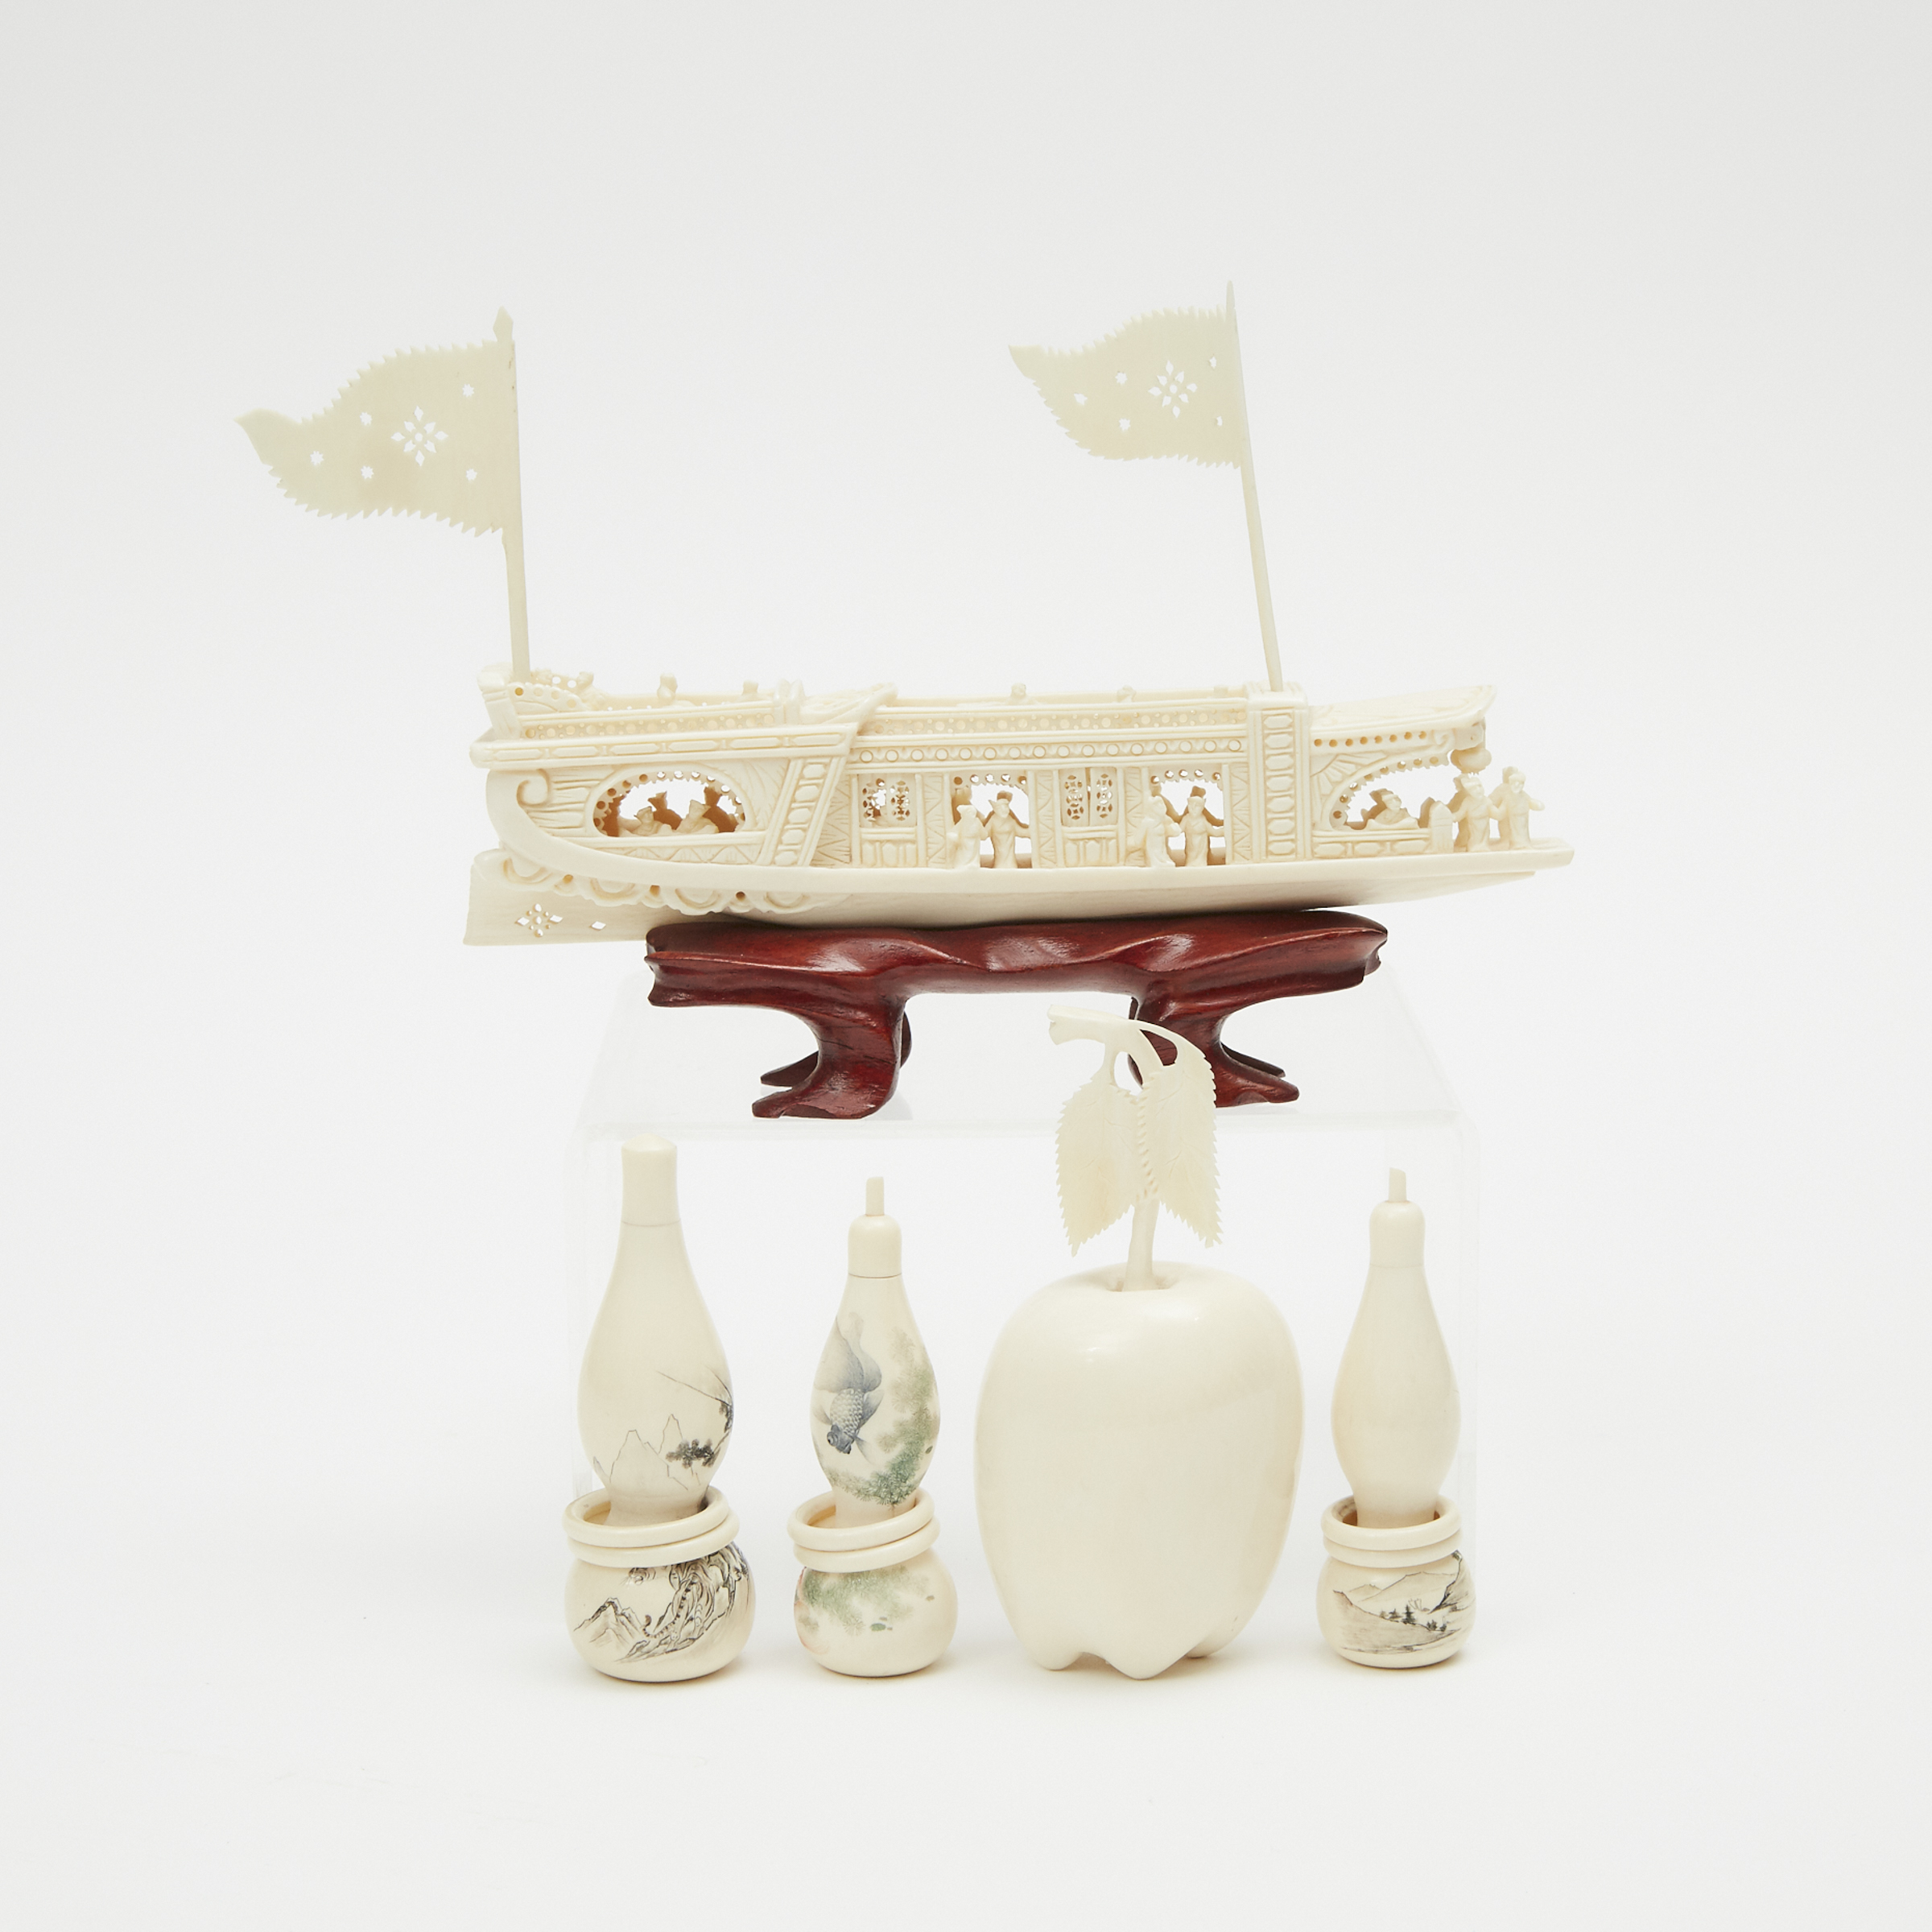 A Group of Five Ivory Carved Objects, Republican Period